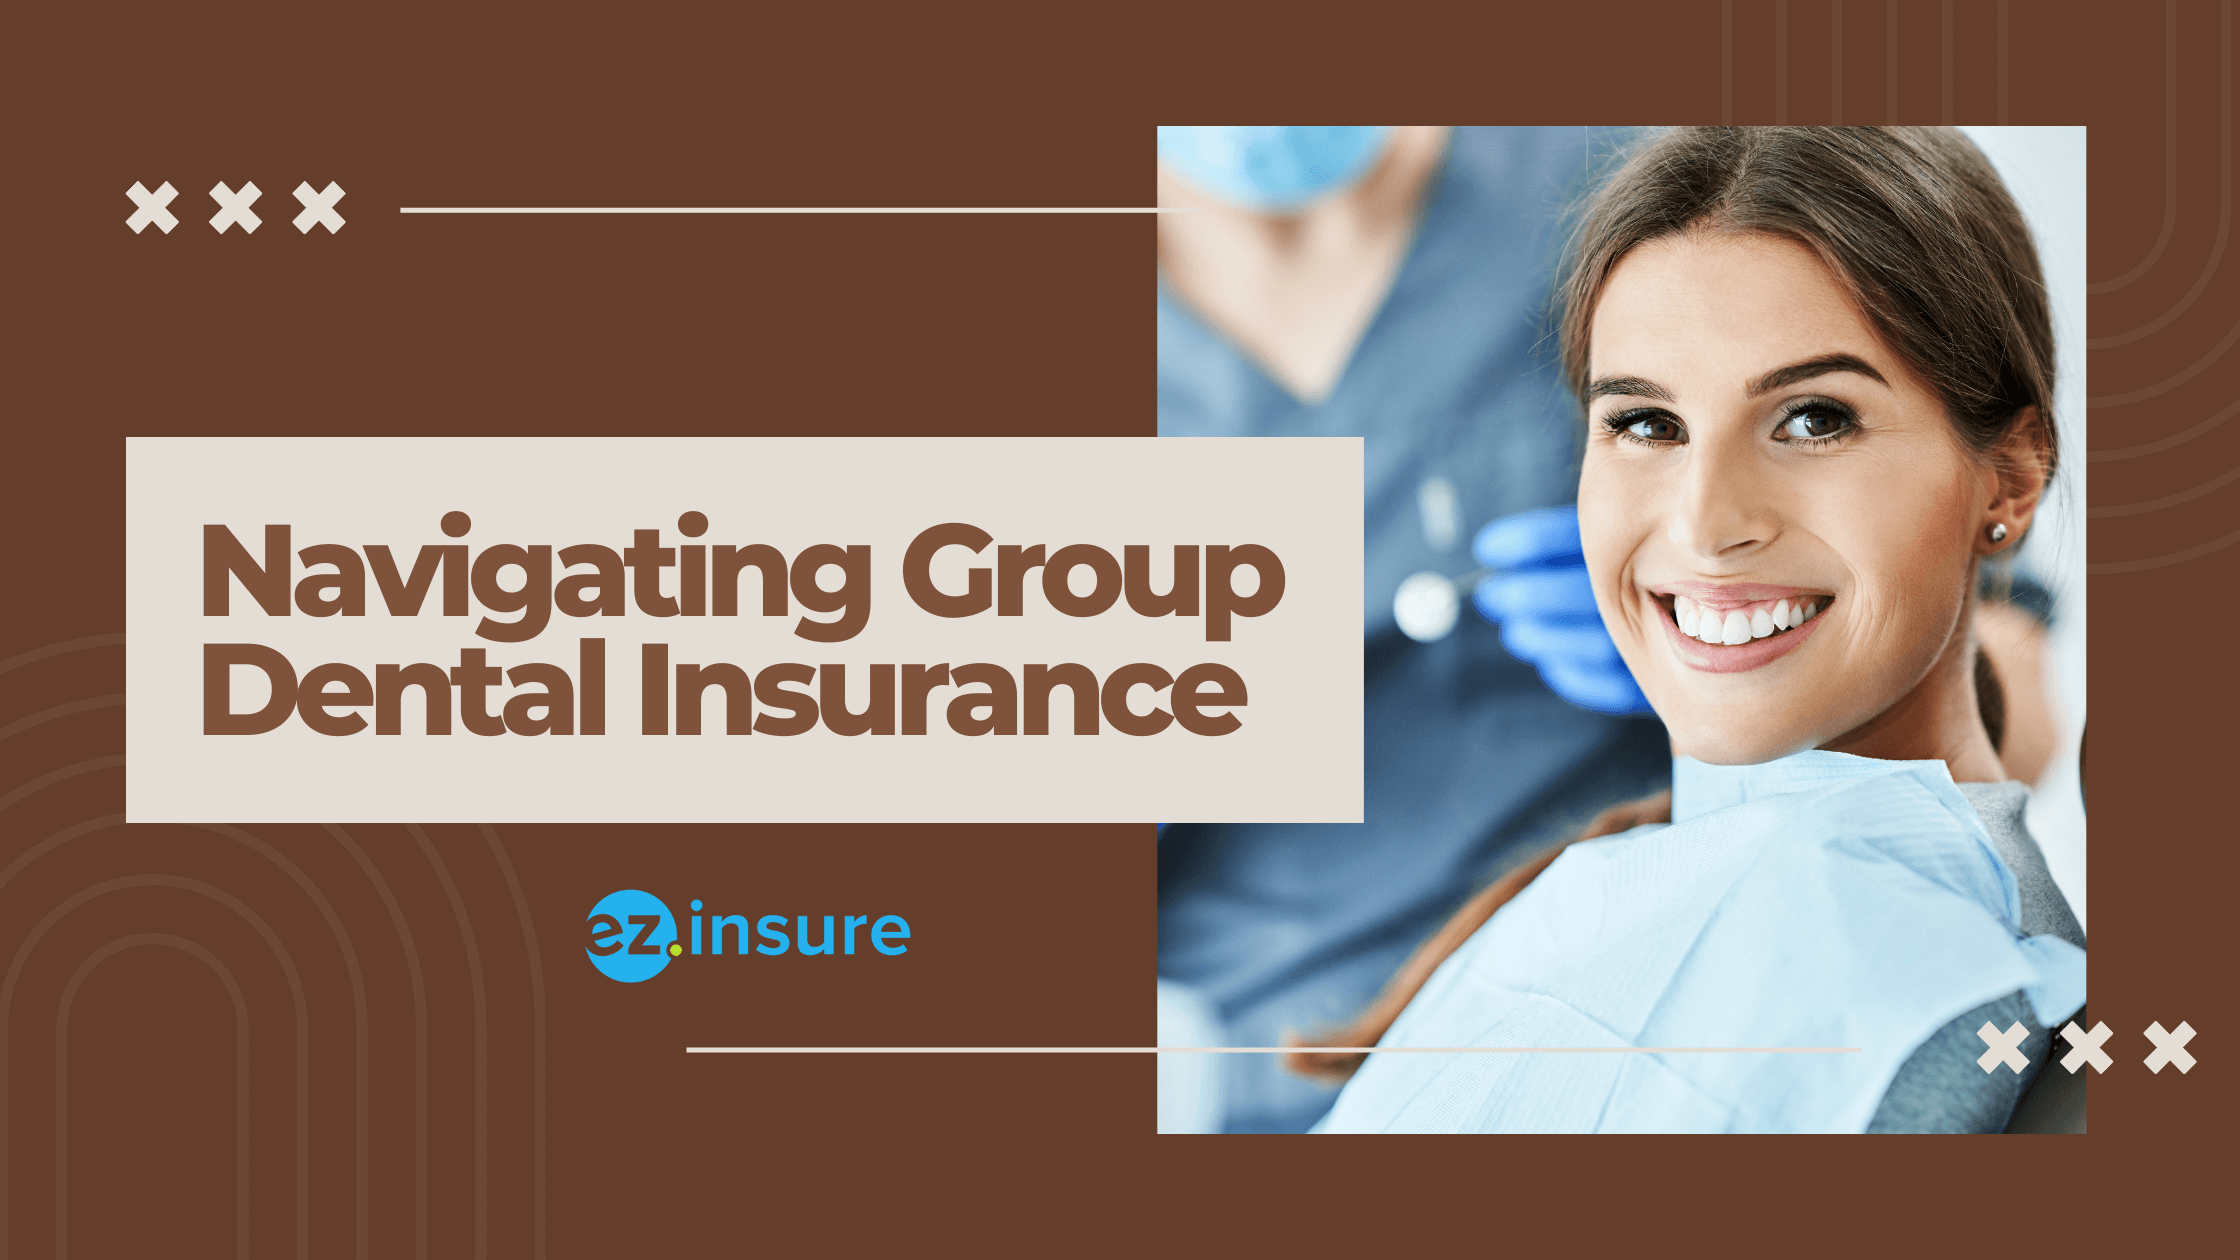 Navigating Group Dental Insurance text overlaying an image of a dental patient